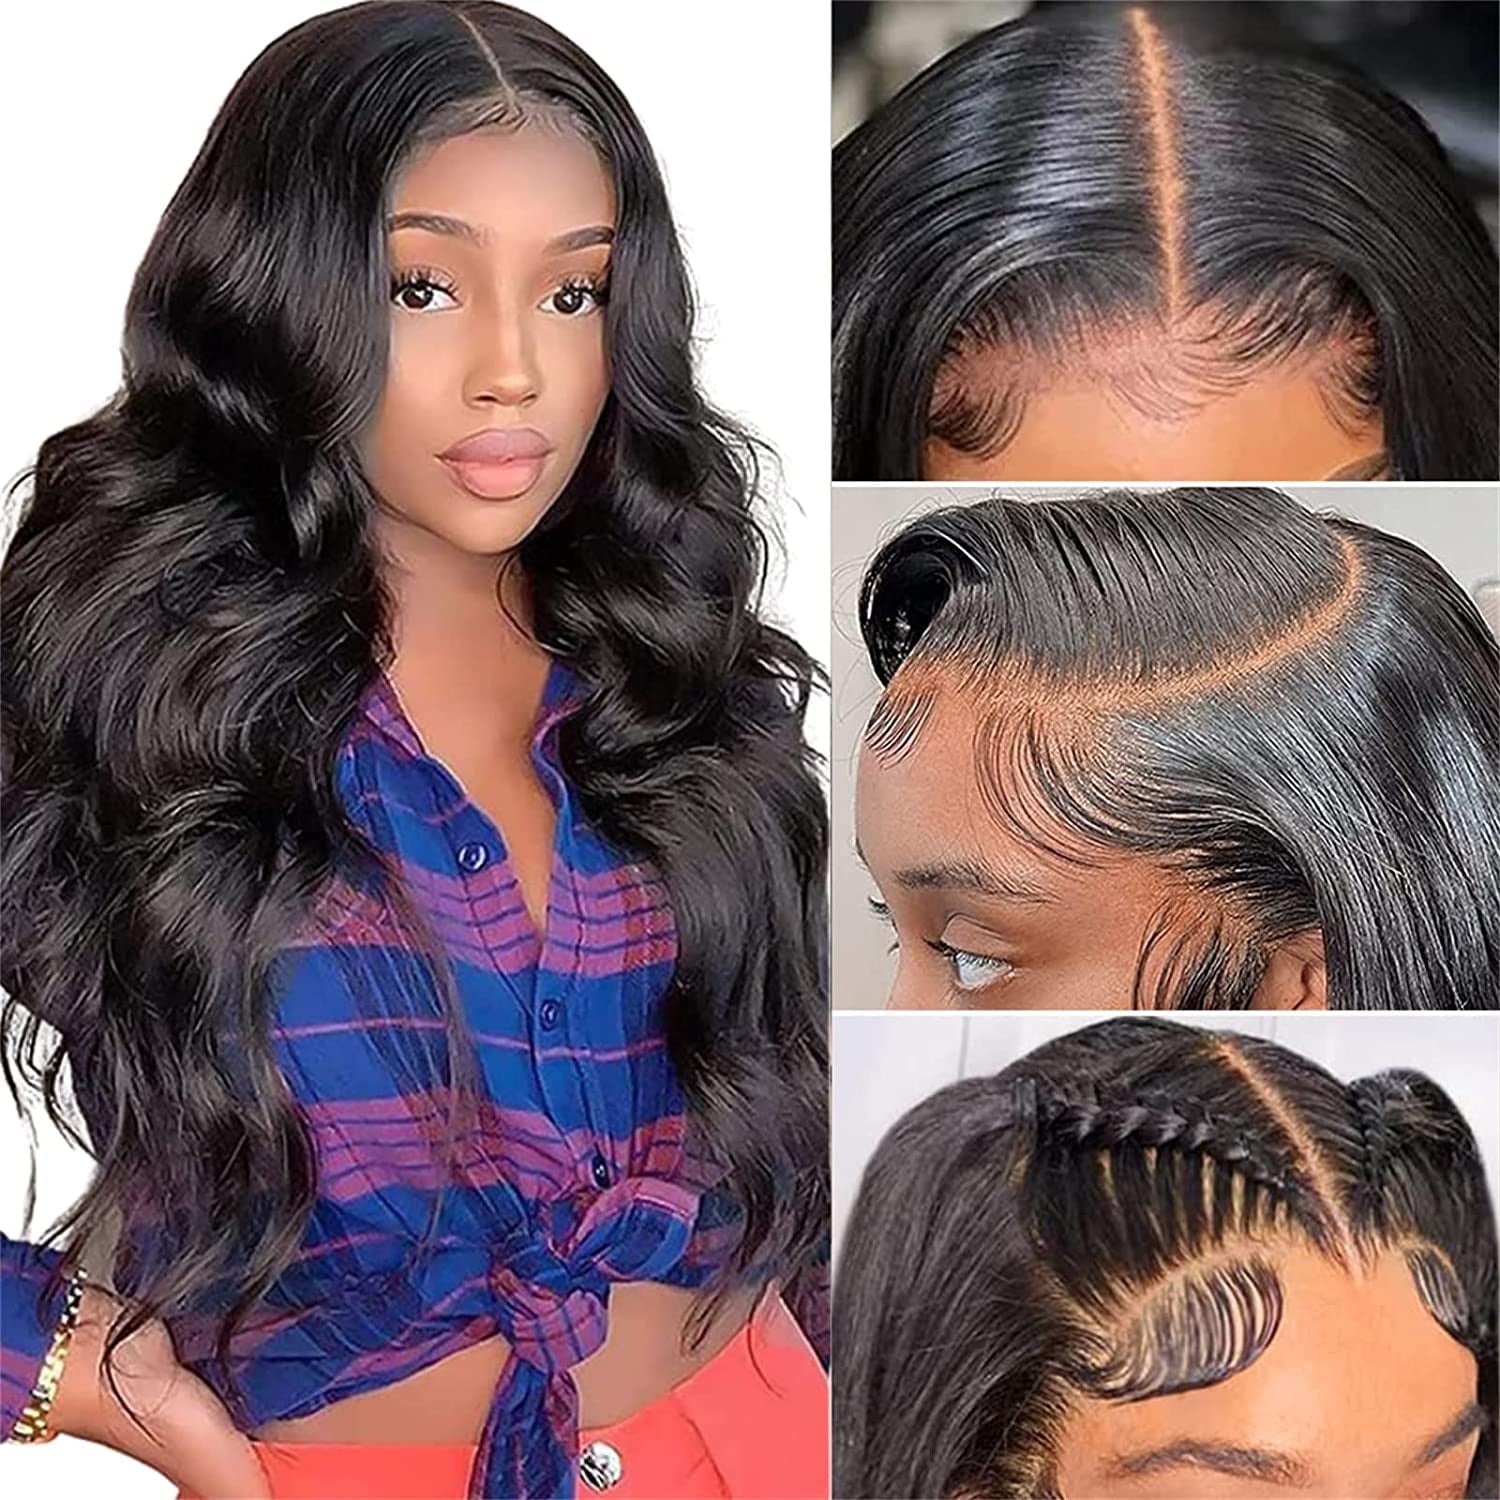 26 Inch Body Wave Lace Front Wigs Human Hair Pre Plucked 180